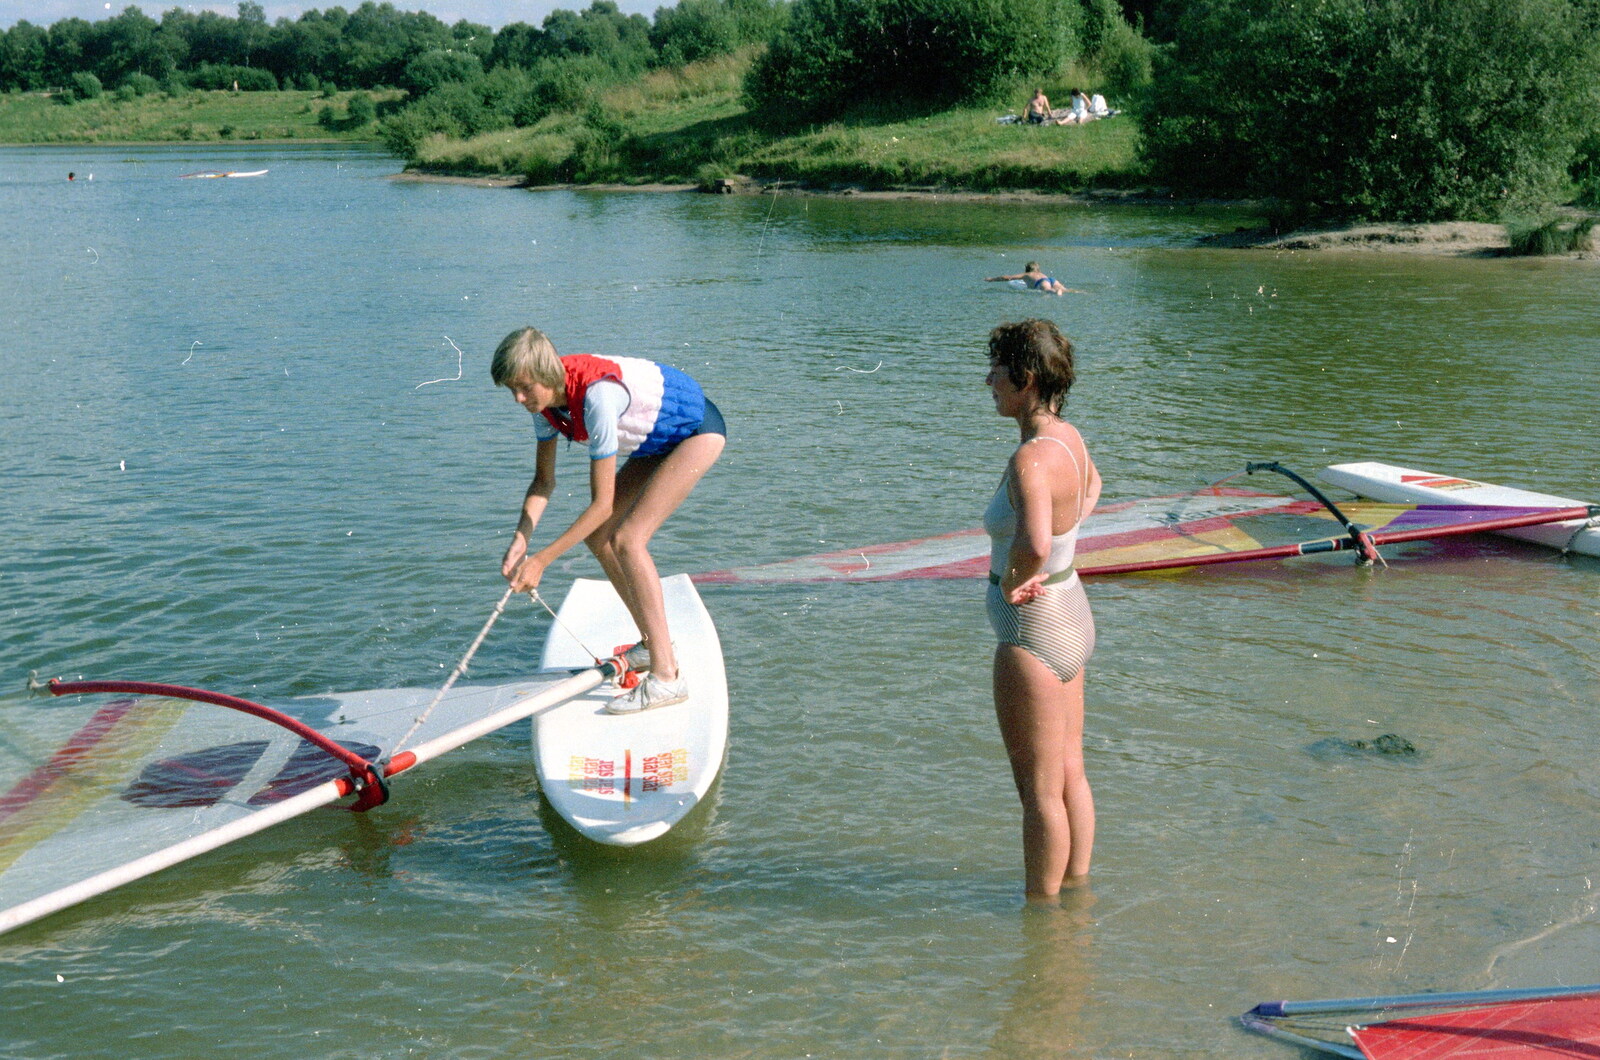 Nosher tries to haul the sail back up from Nosher Goes Windsurfing, Macclesfield, Cheshire - 20th June 1985